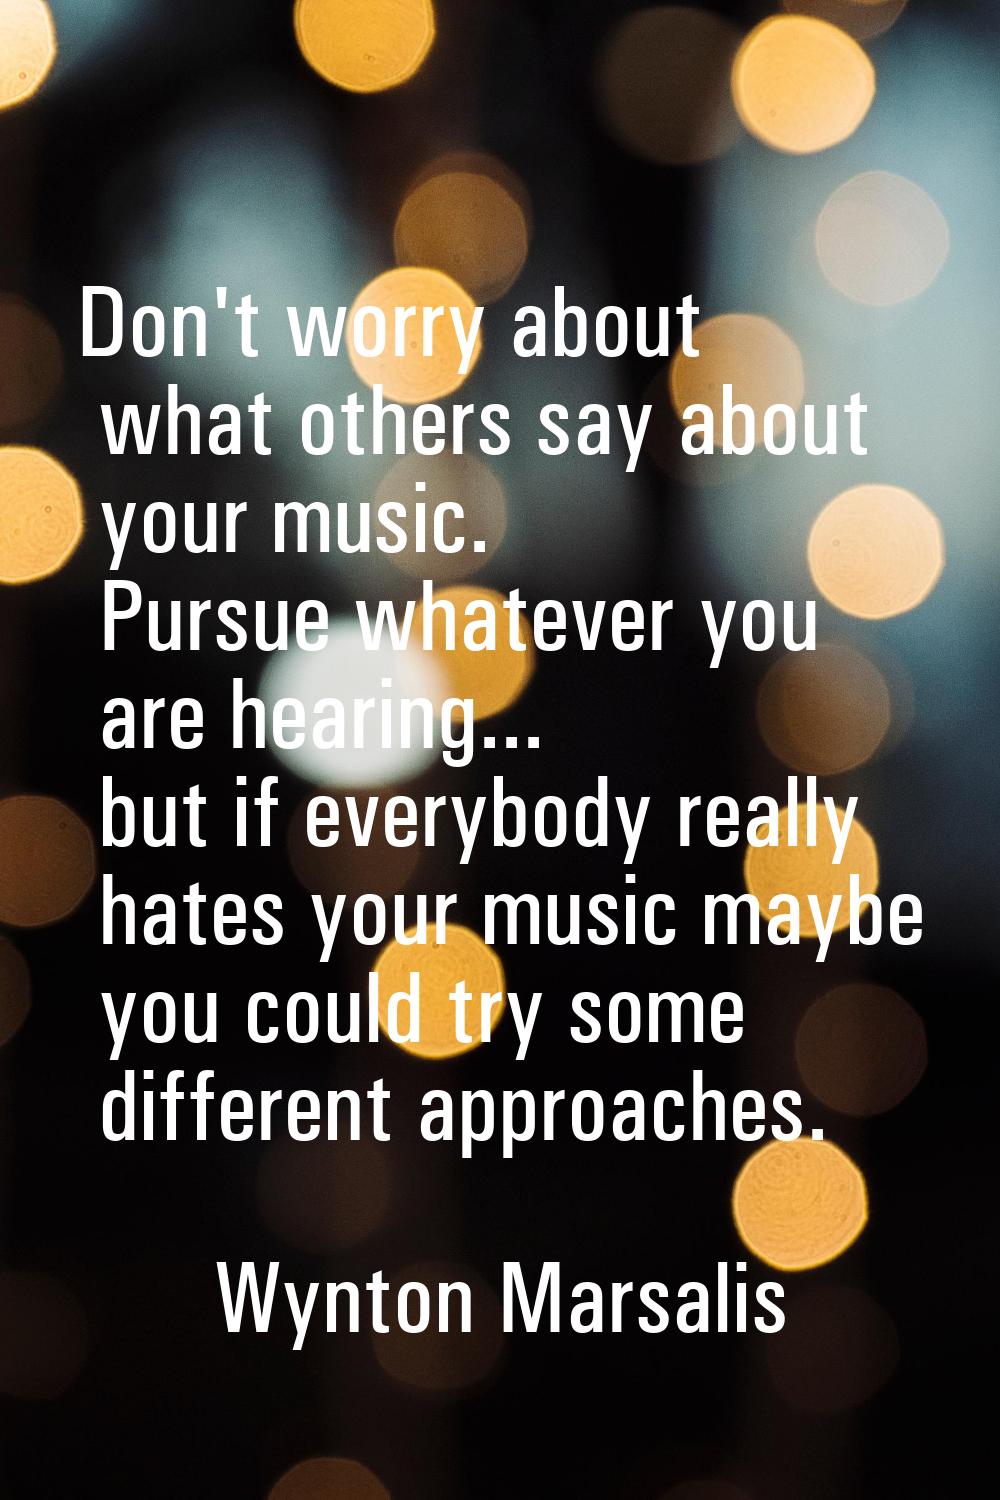 Don't worry about what others say about your music. Pursue whatever you are hearing... but if every